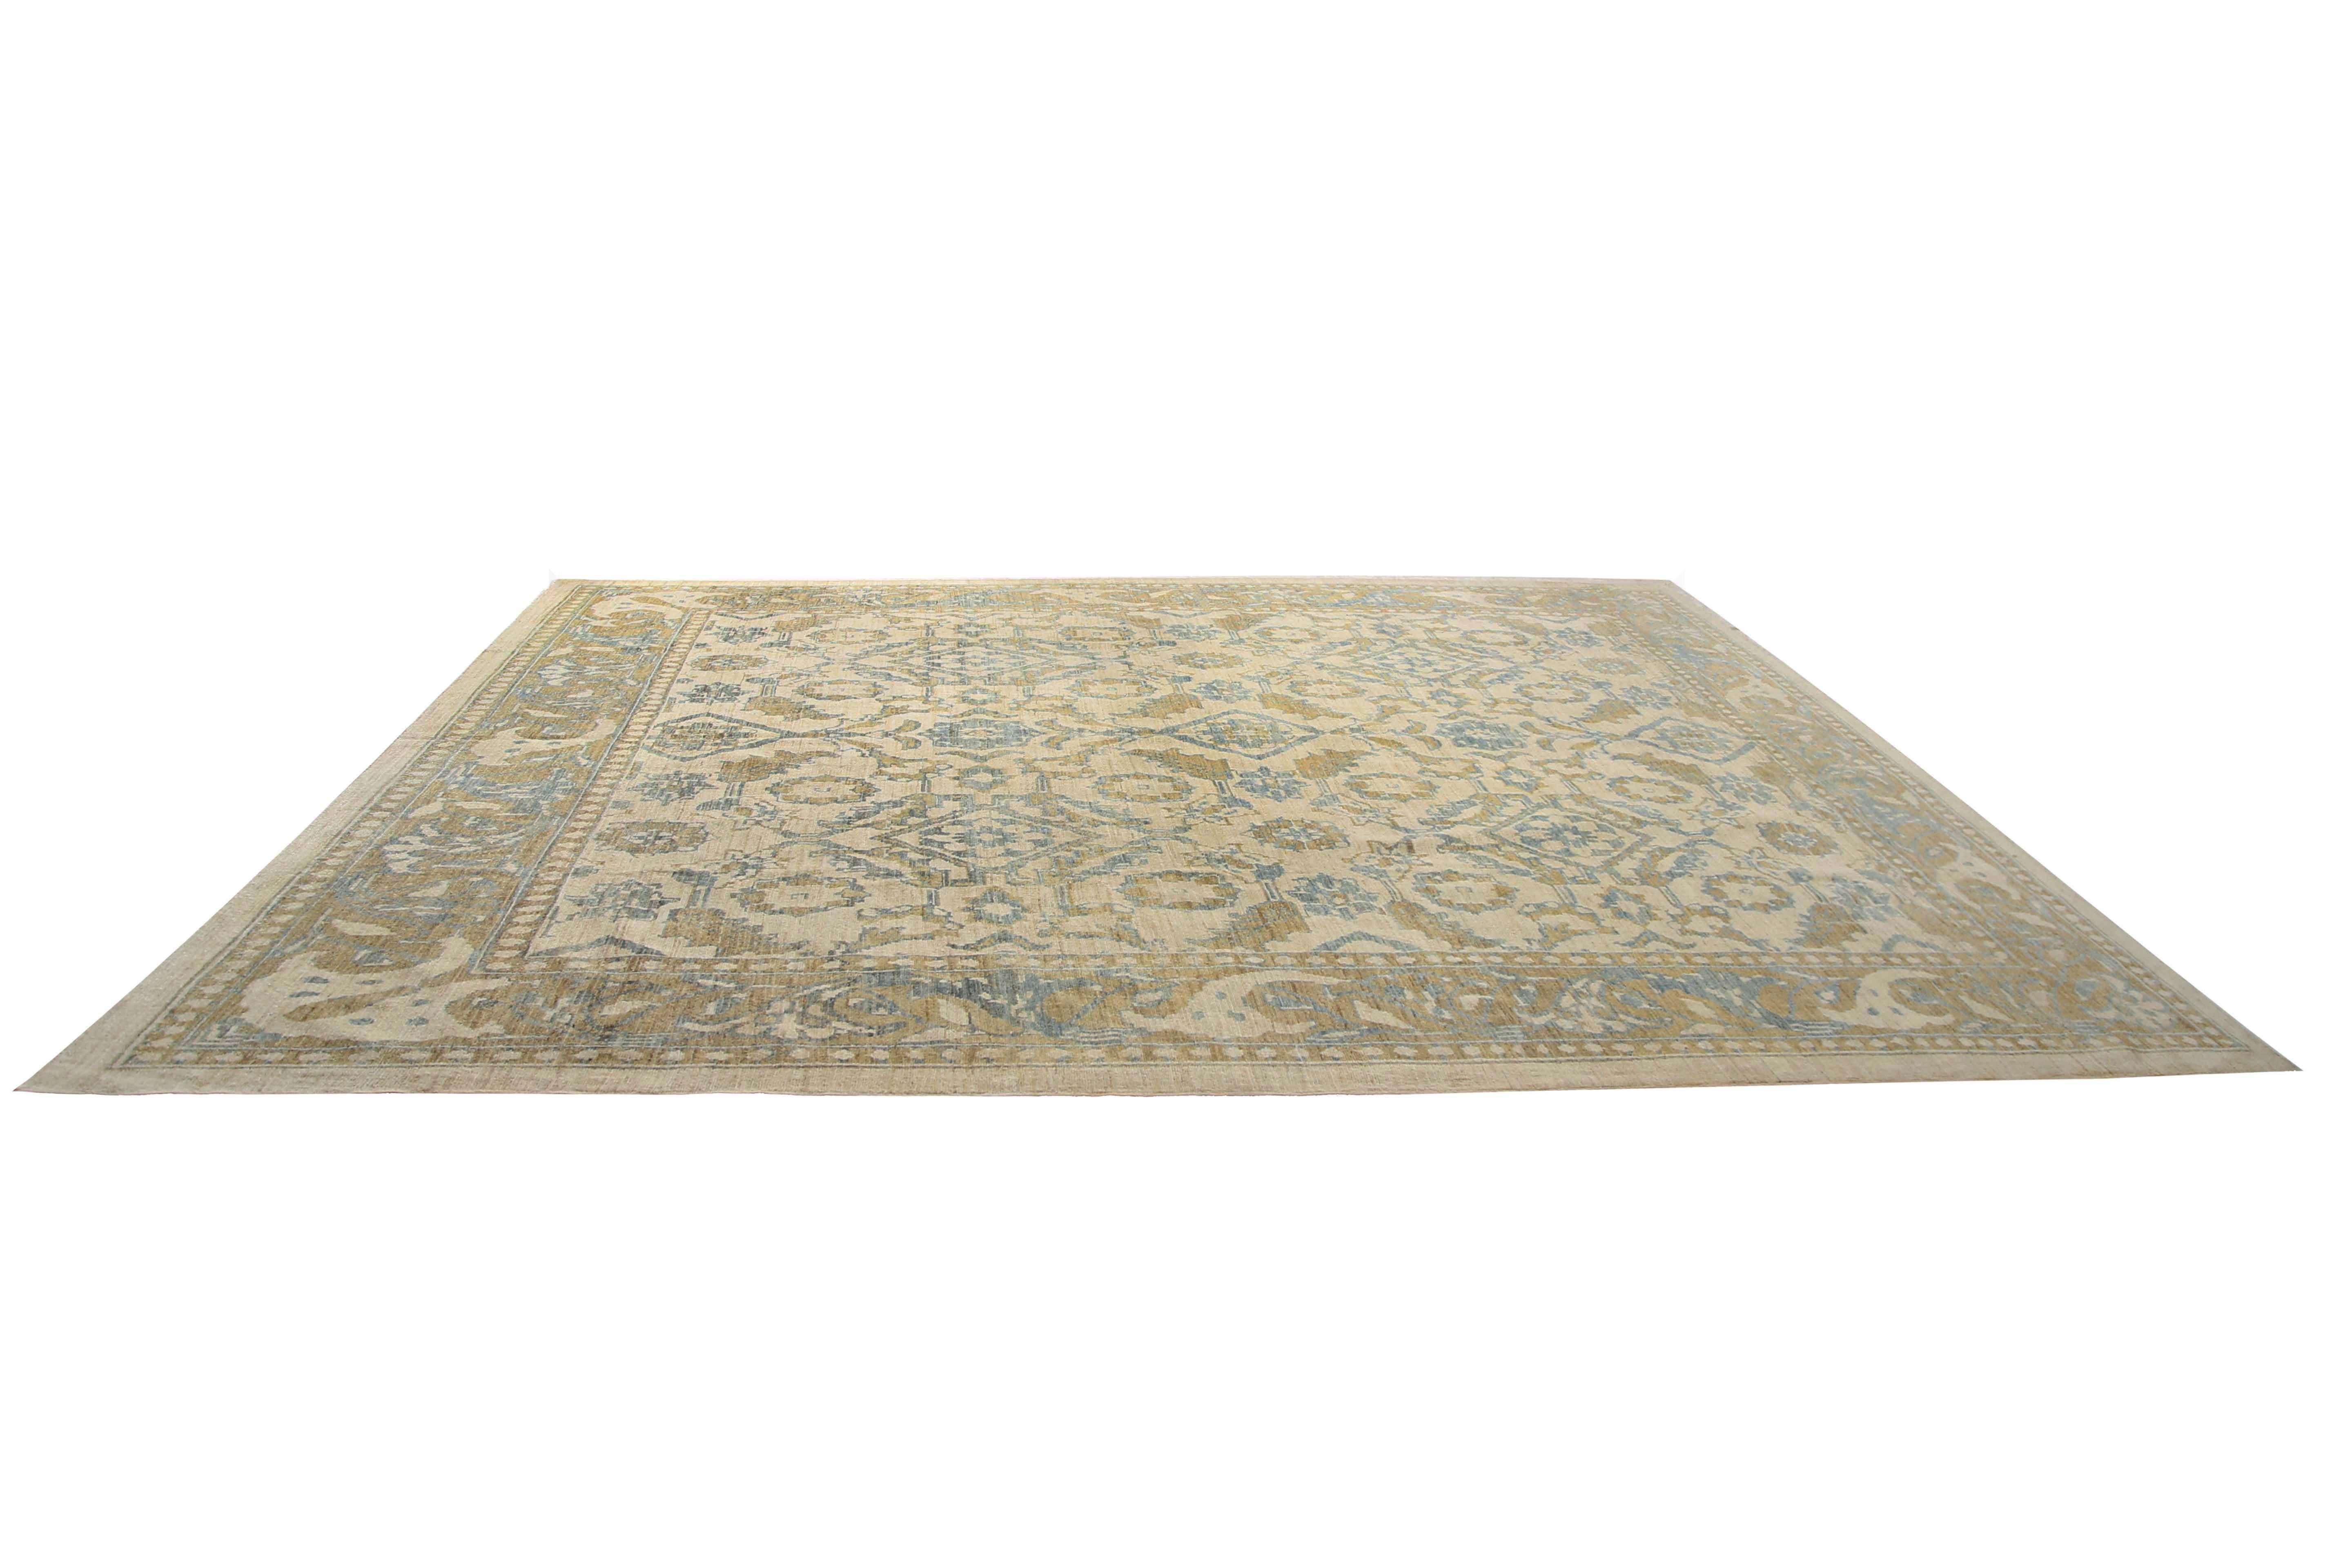 Luxurious Handmade Sultanabad Rug - Transitional Design, Blue, Green, and Yellow For Sale 5